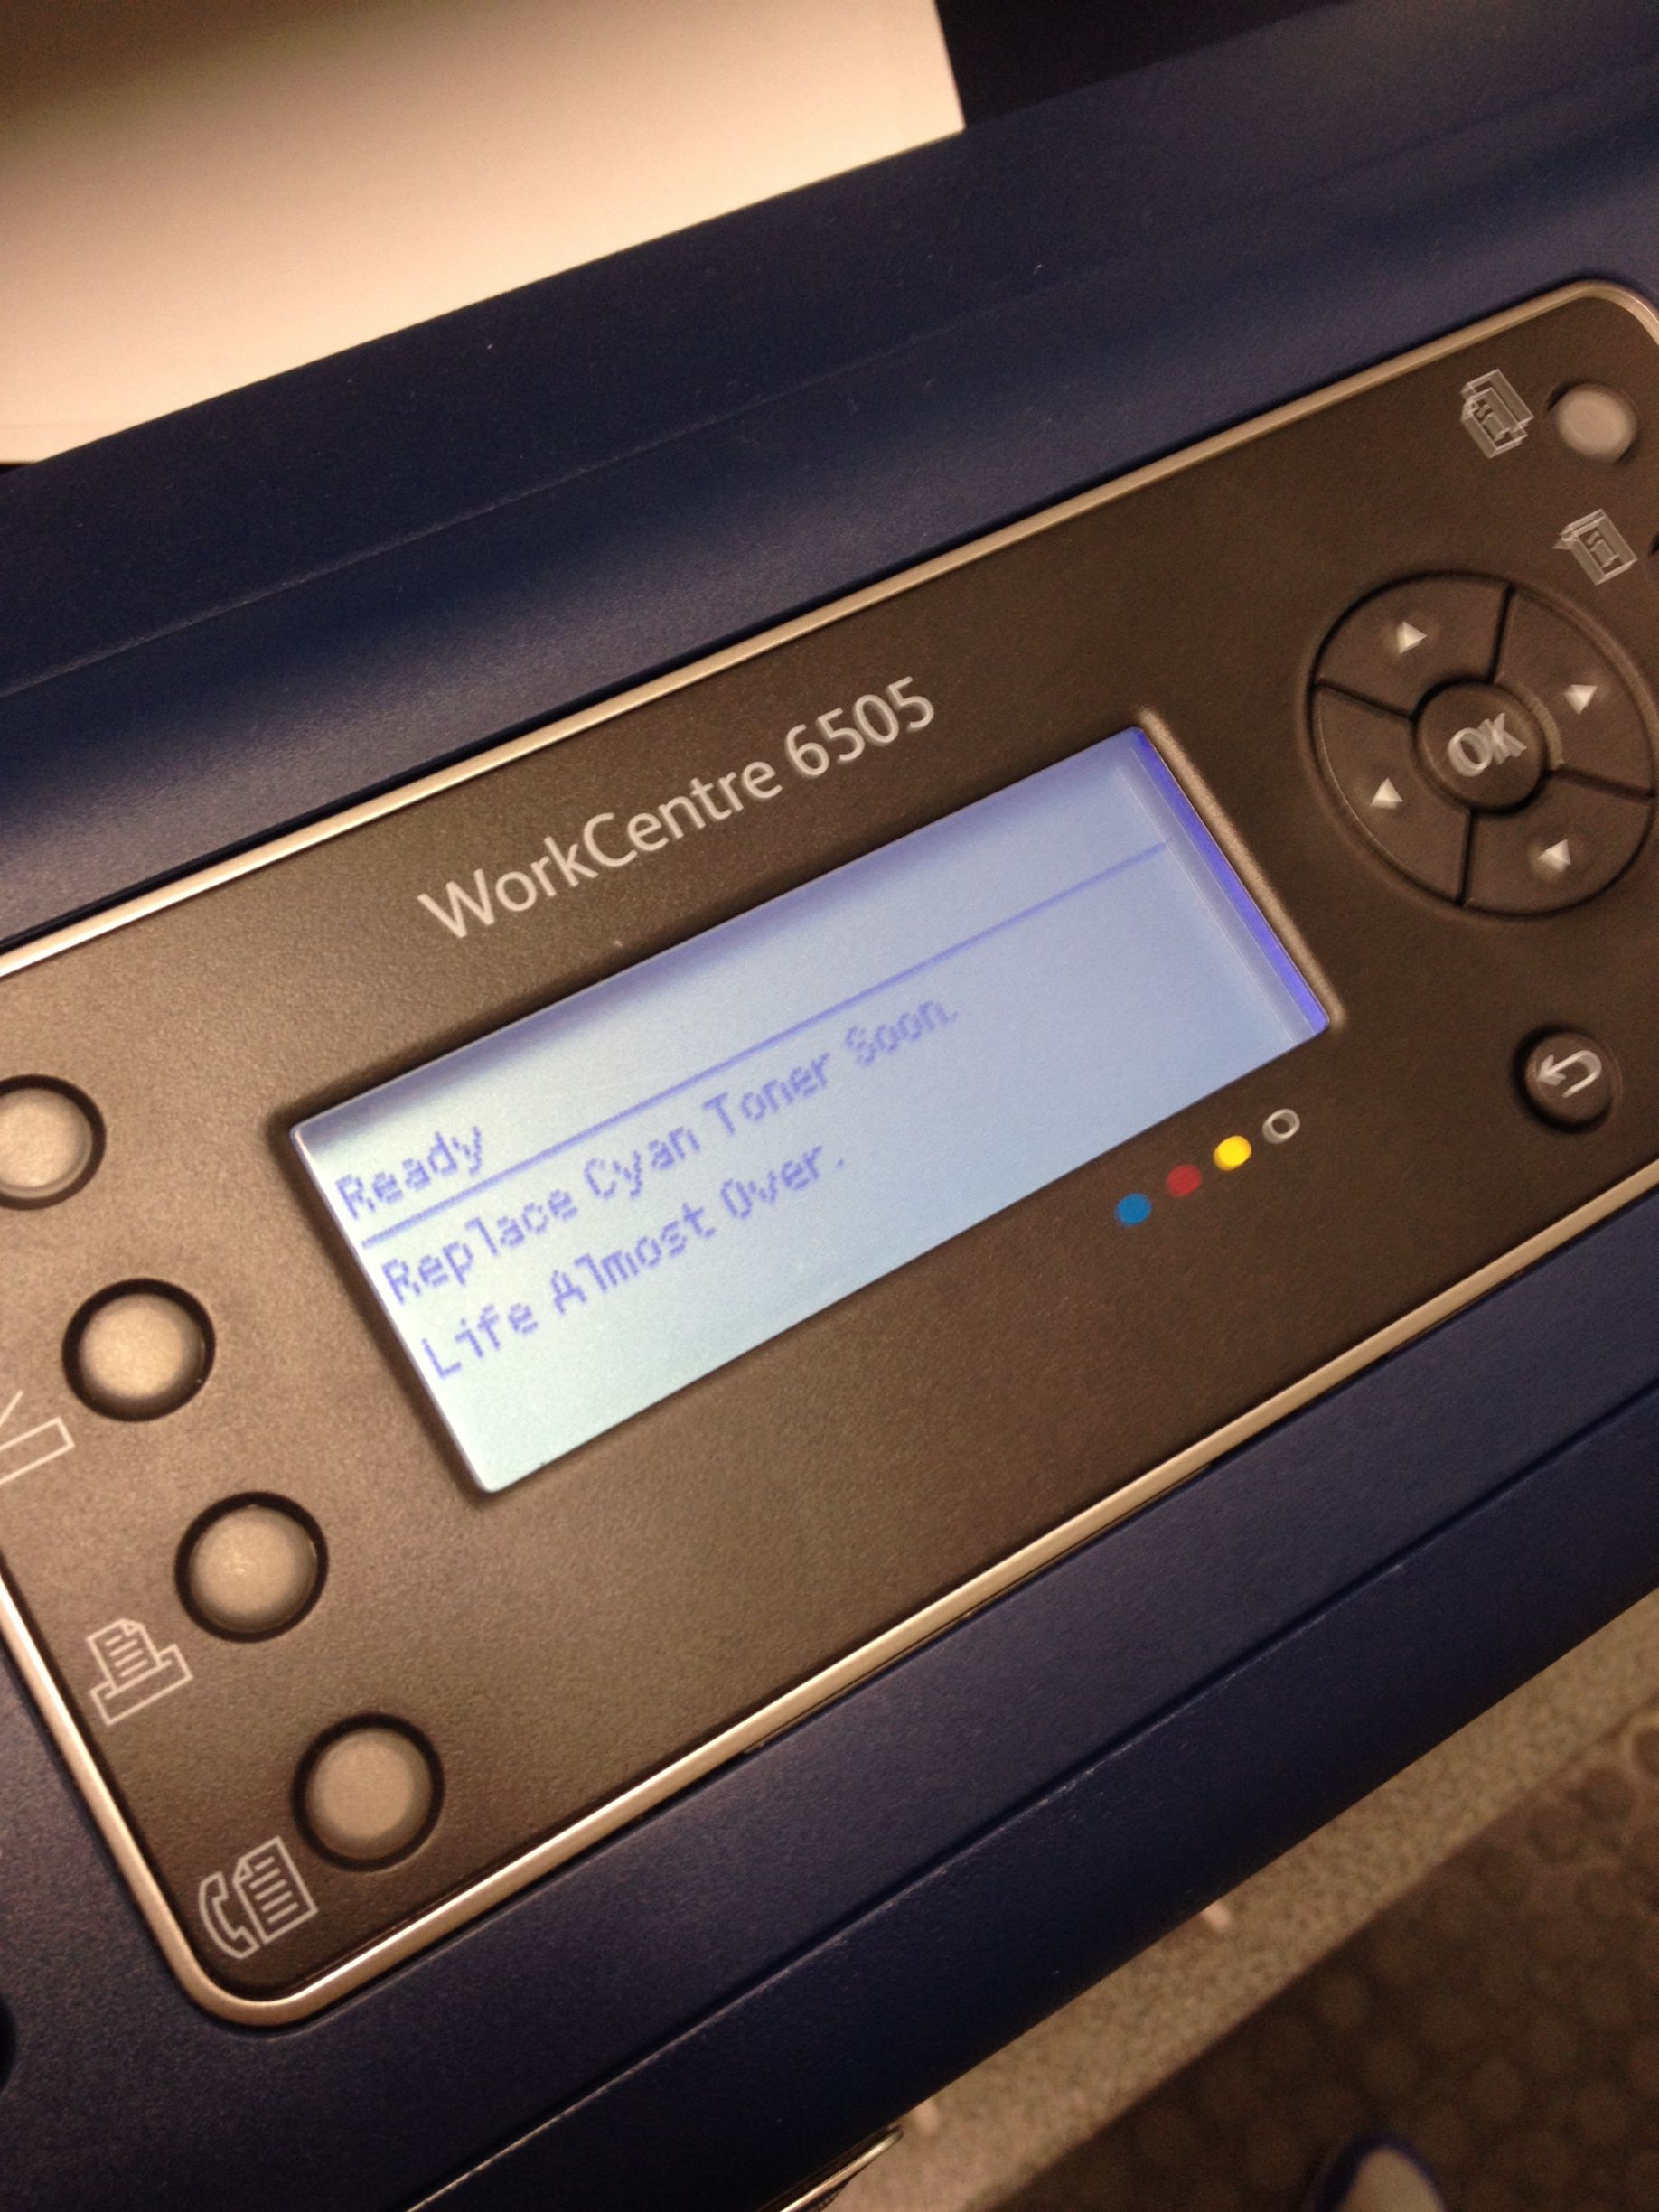 The printer at work is such a drama queen